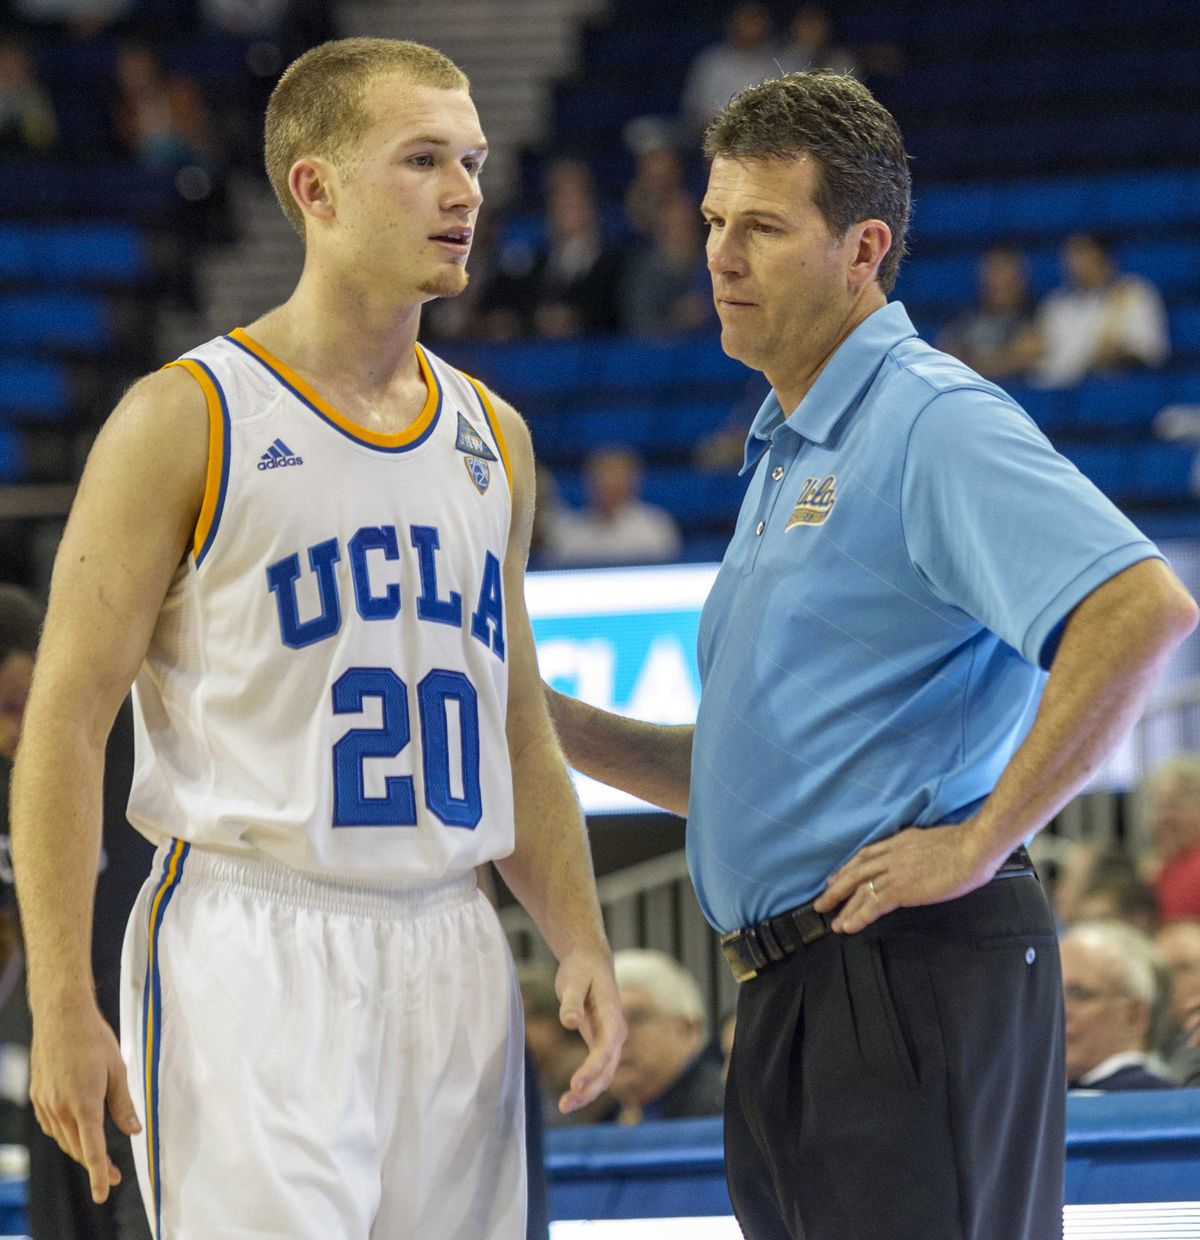 Steve Alford has two sons on his roster at UCLA – Bryce (pictured) and Kory. (Associated Press)